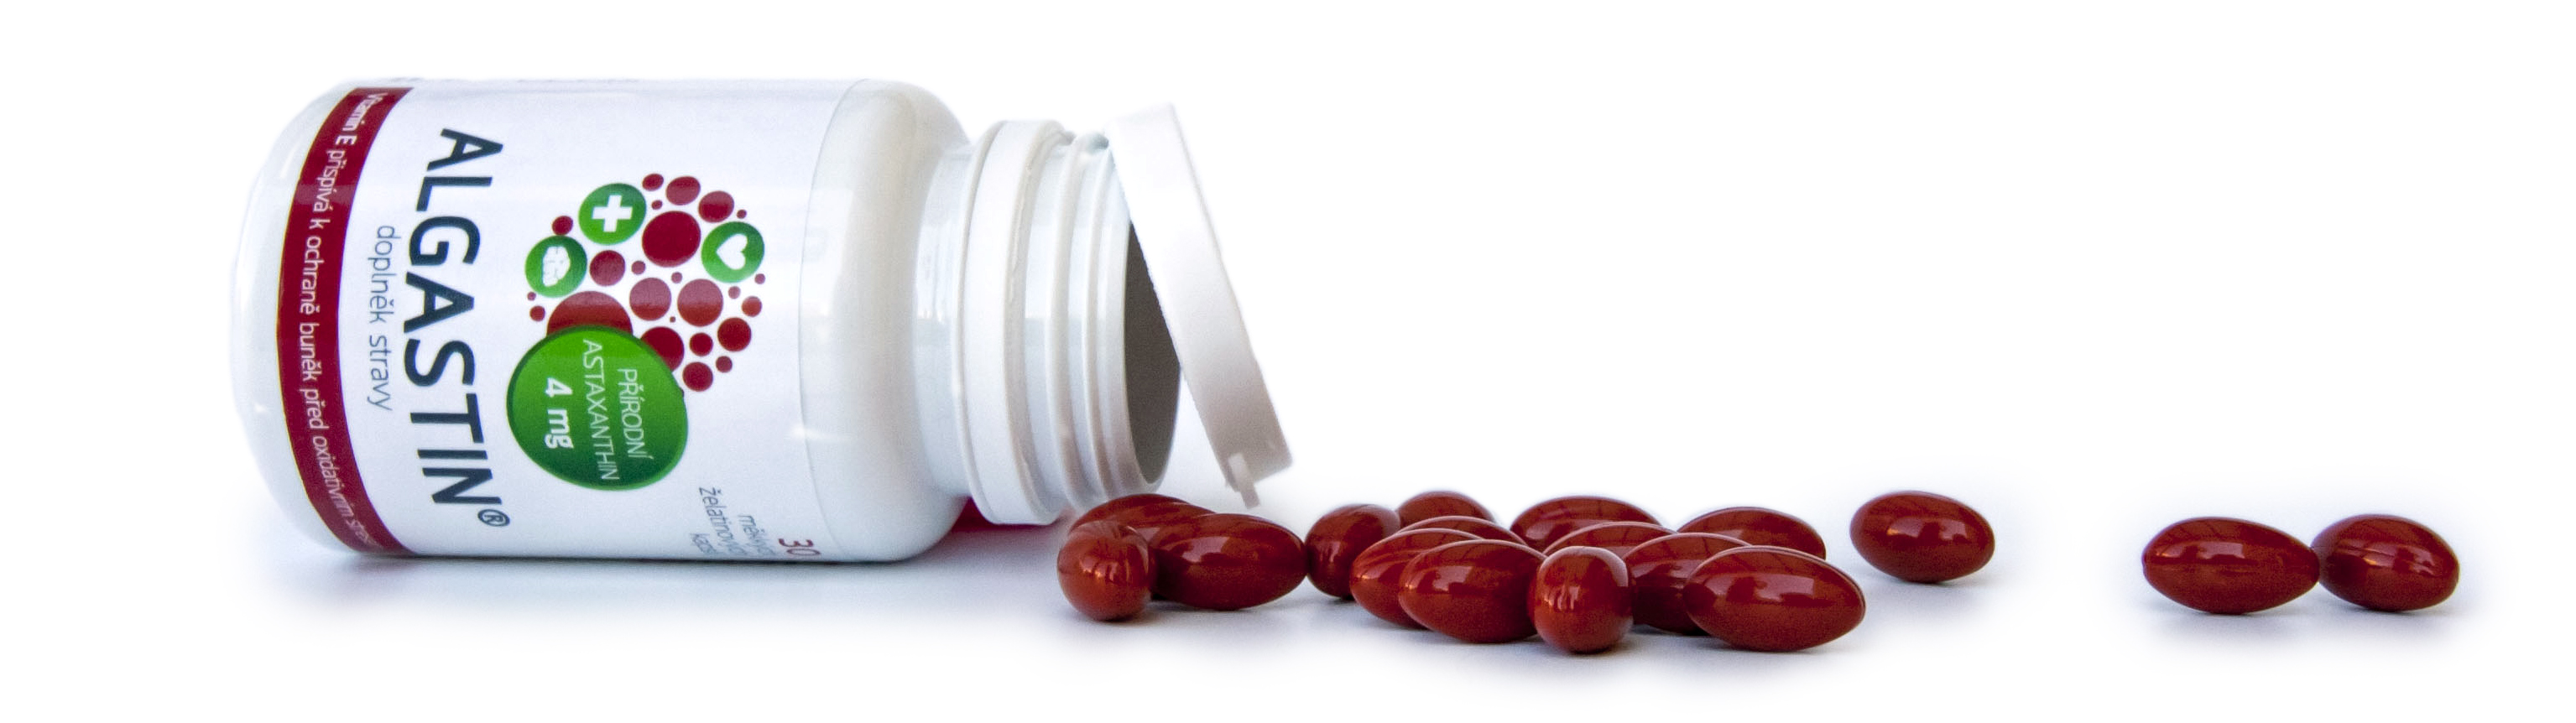 Softgels with astaxanthin